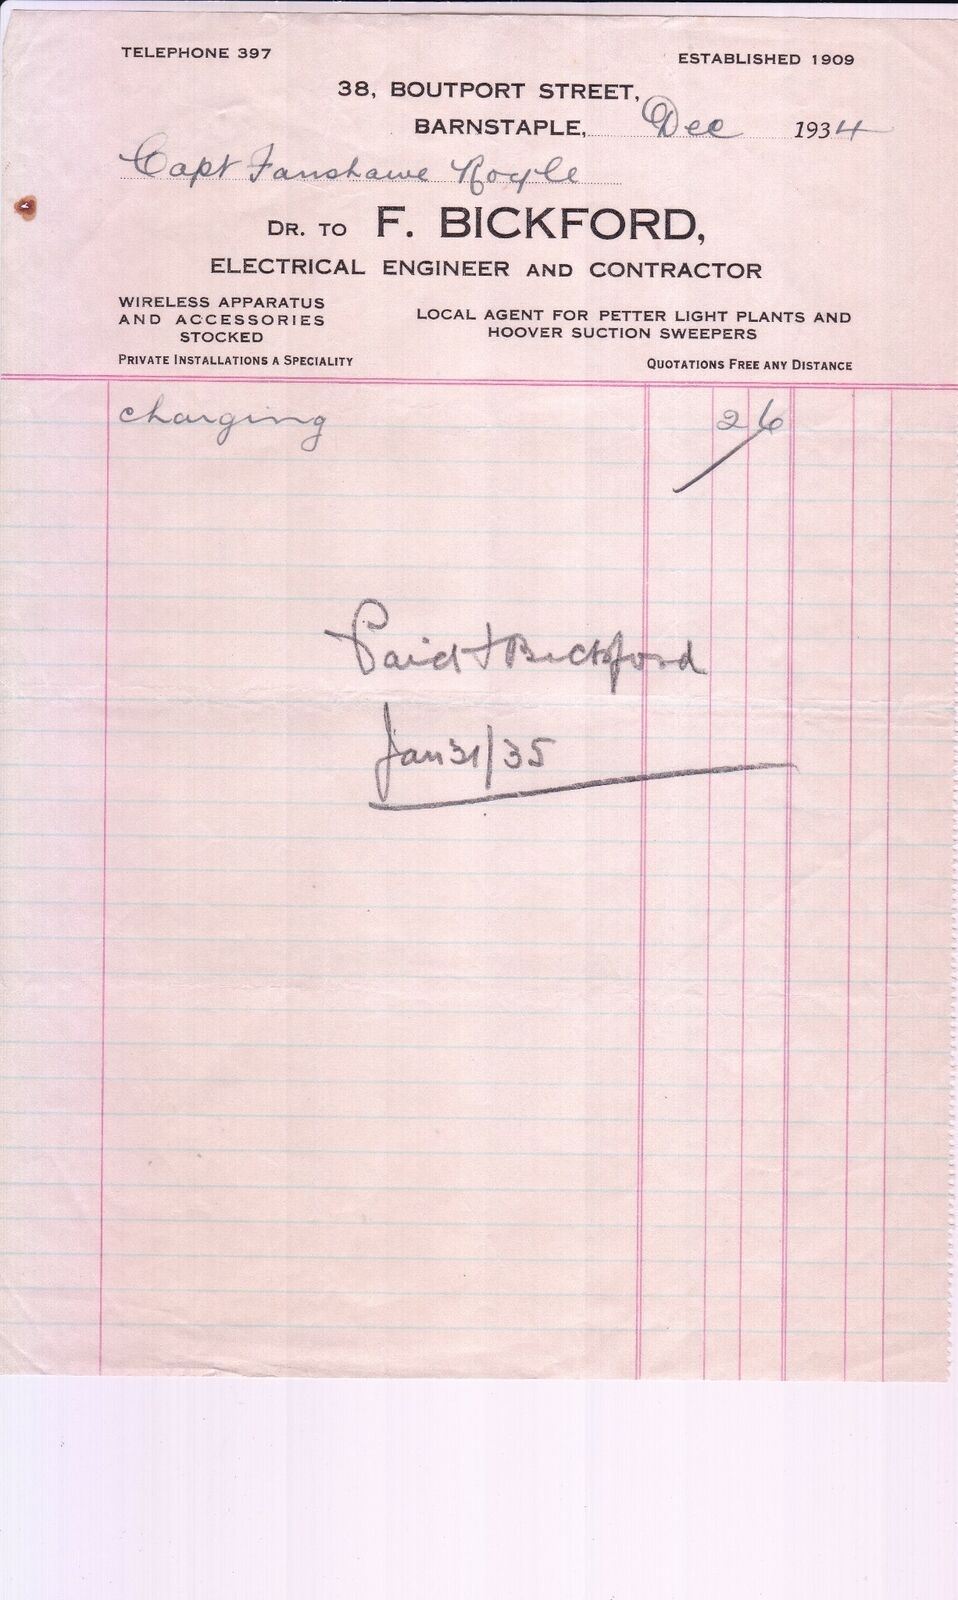 F. BICKFORD, Southport St, 1934 Electrical Engineer/Contractor Invoice Ref 47951